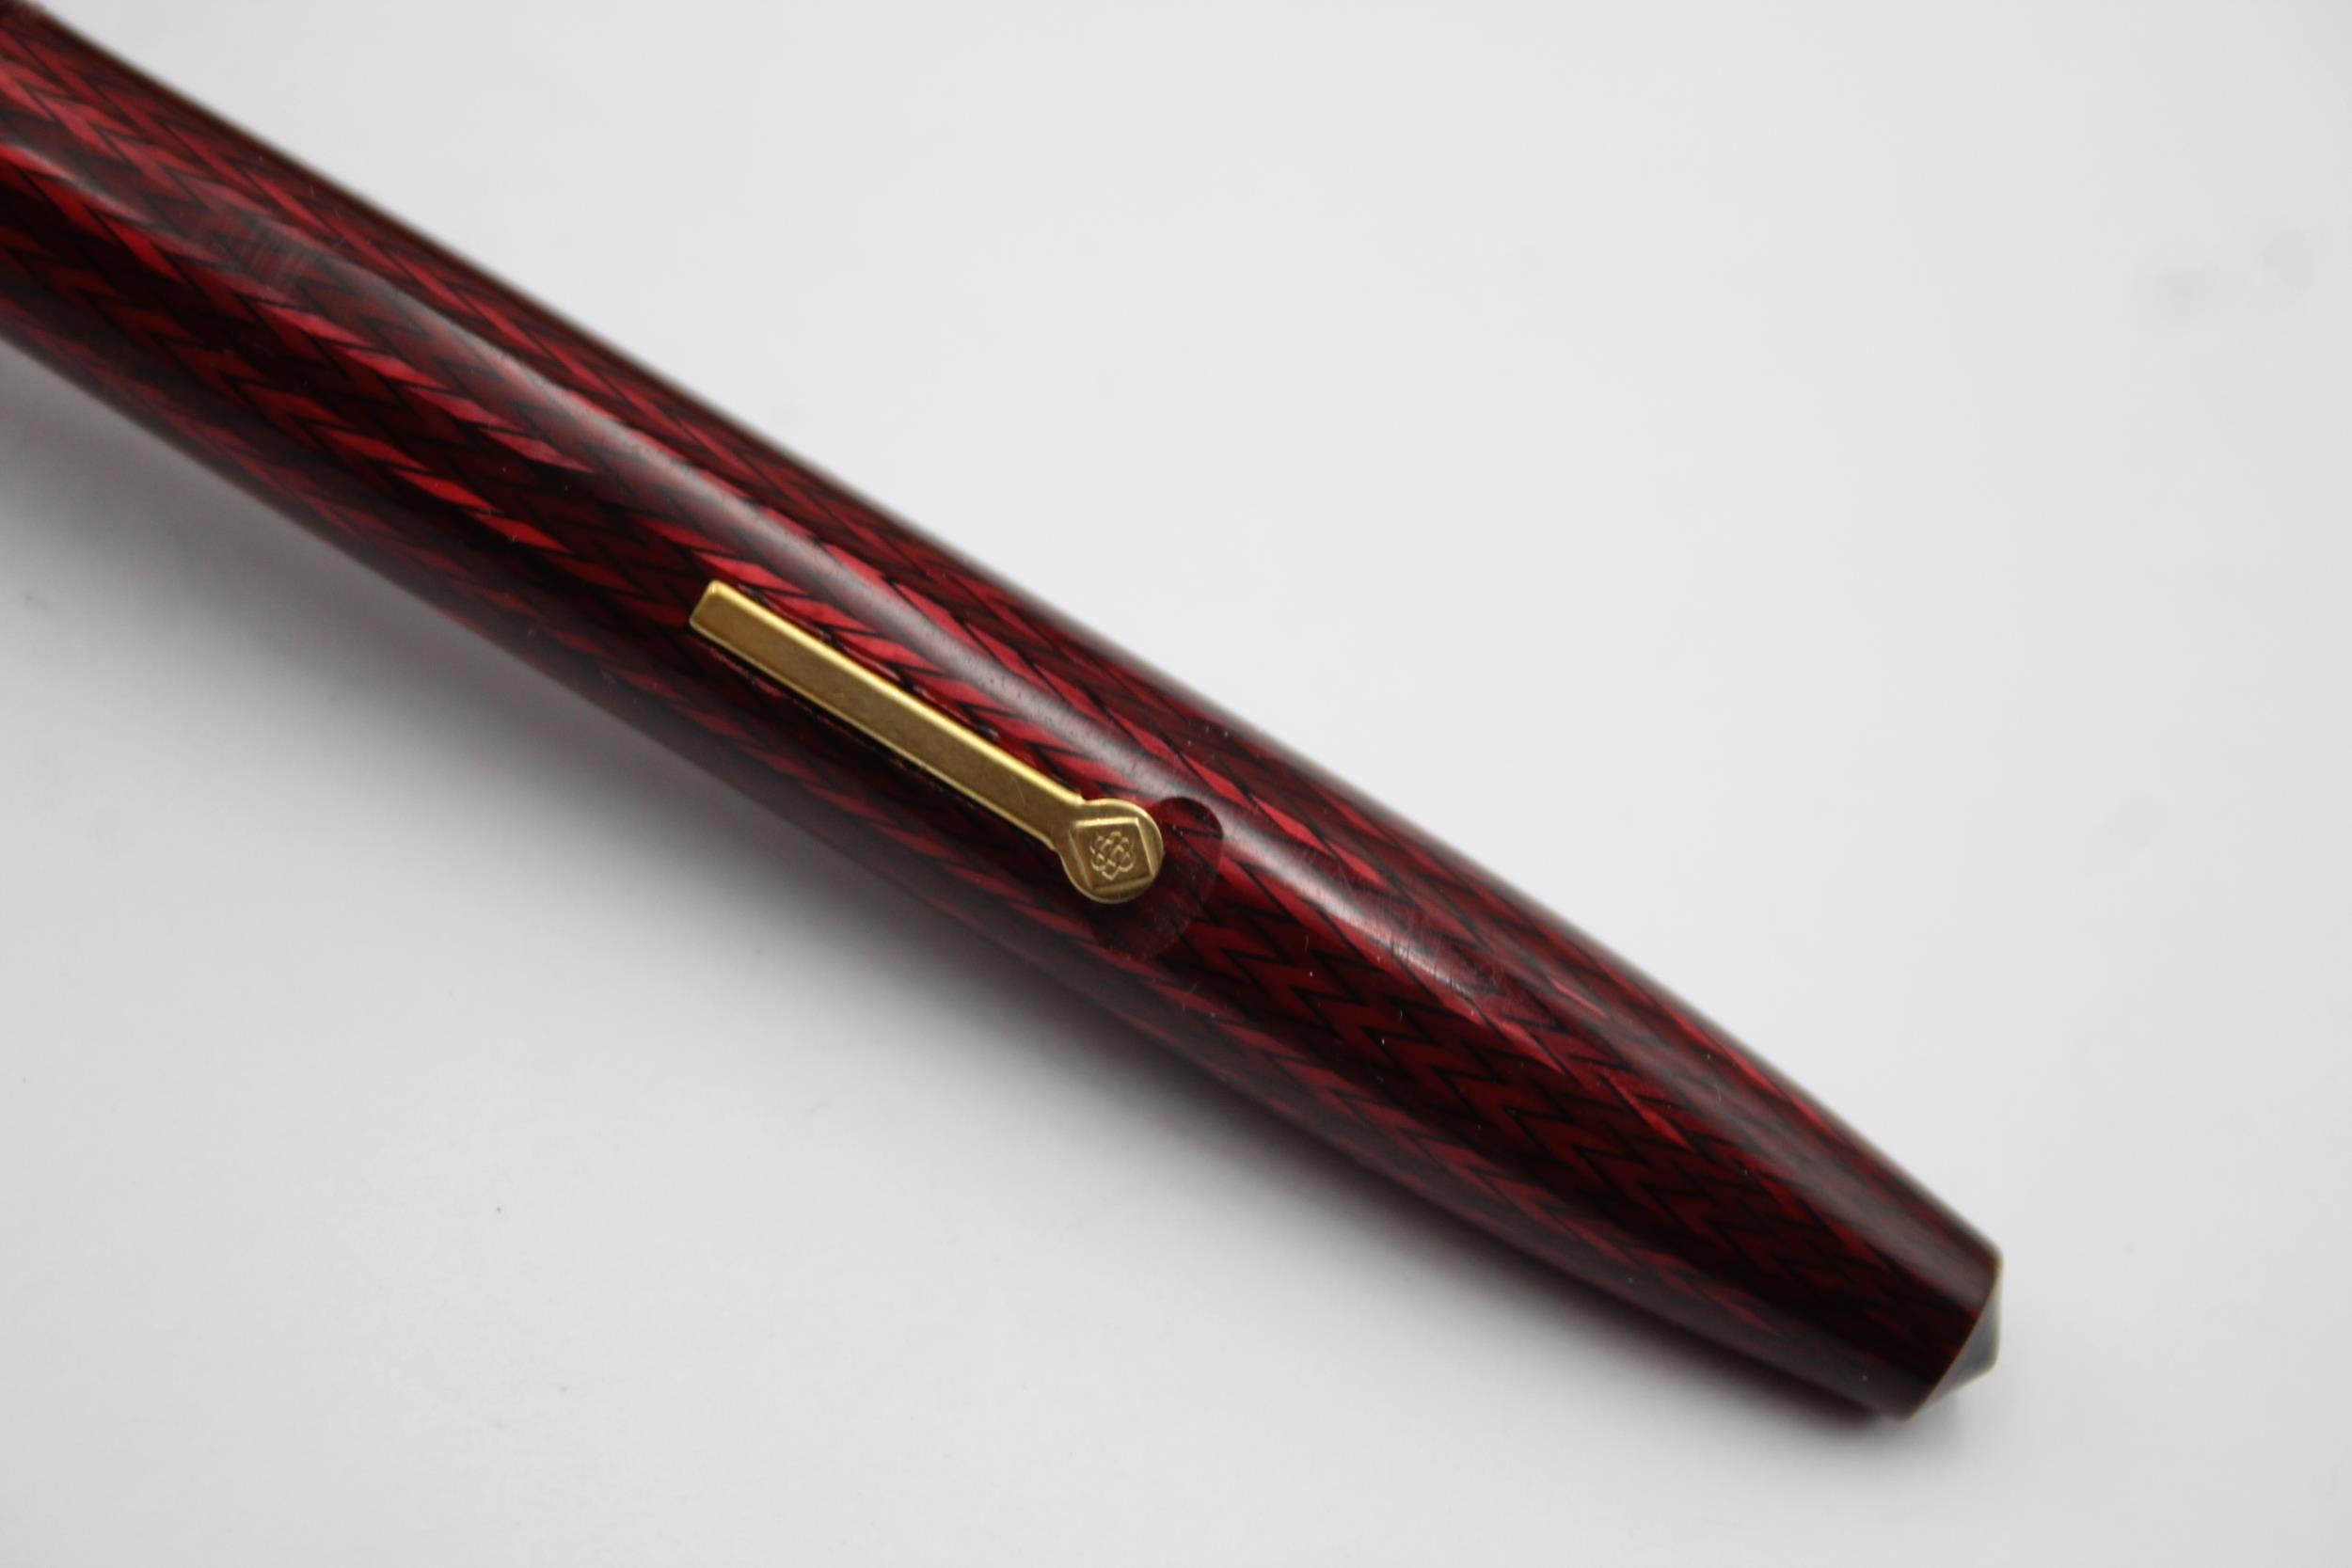 Vintage CONWAY STEWART 85L Burgundy FOUNTAIN PEN w/ 14ct Gold Nib WRITING Boxed - Image 2 of 4